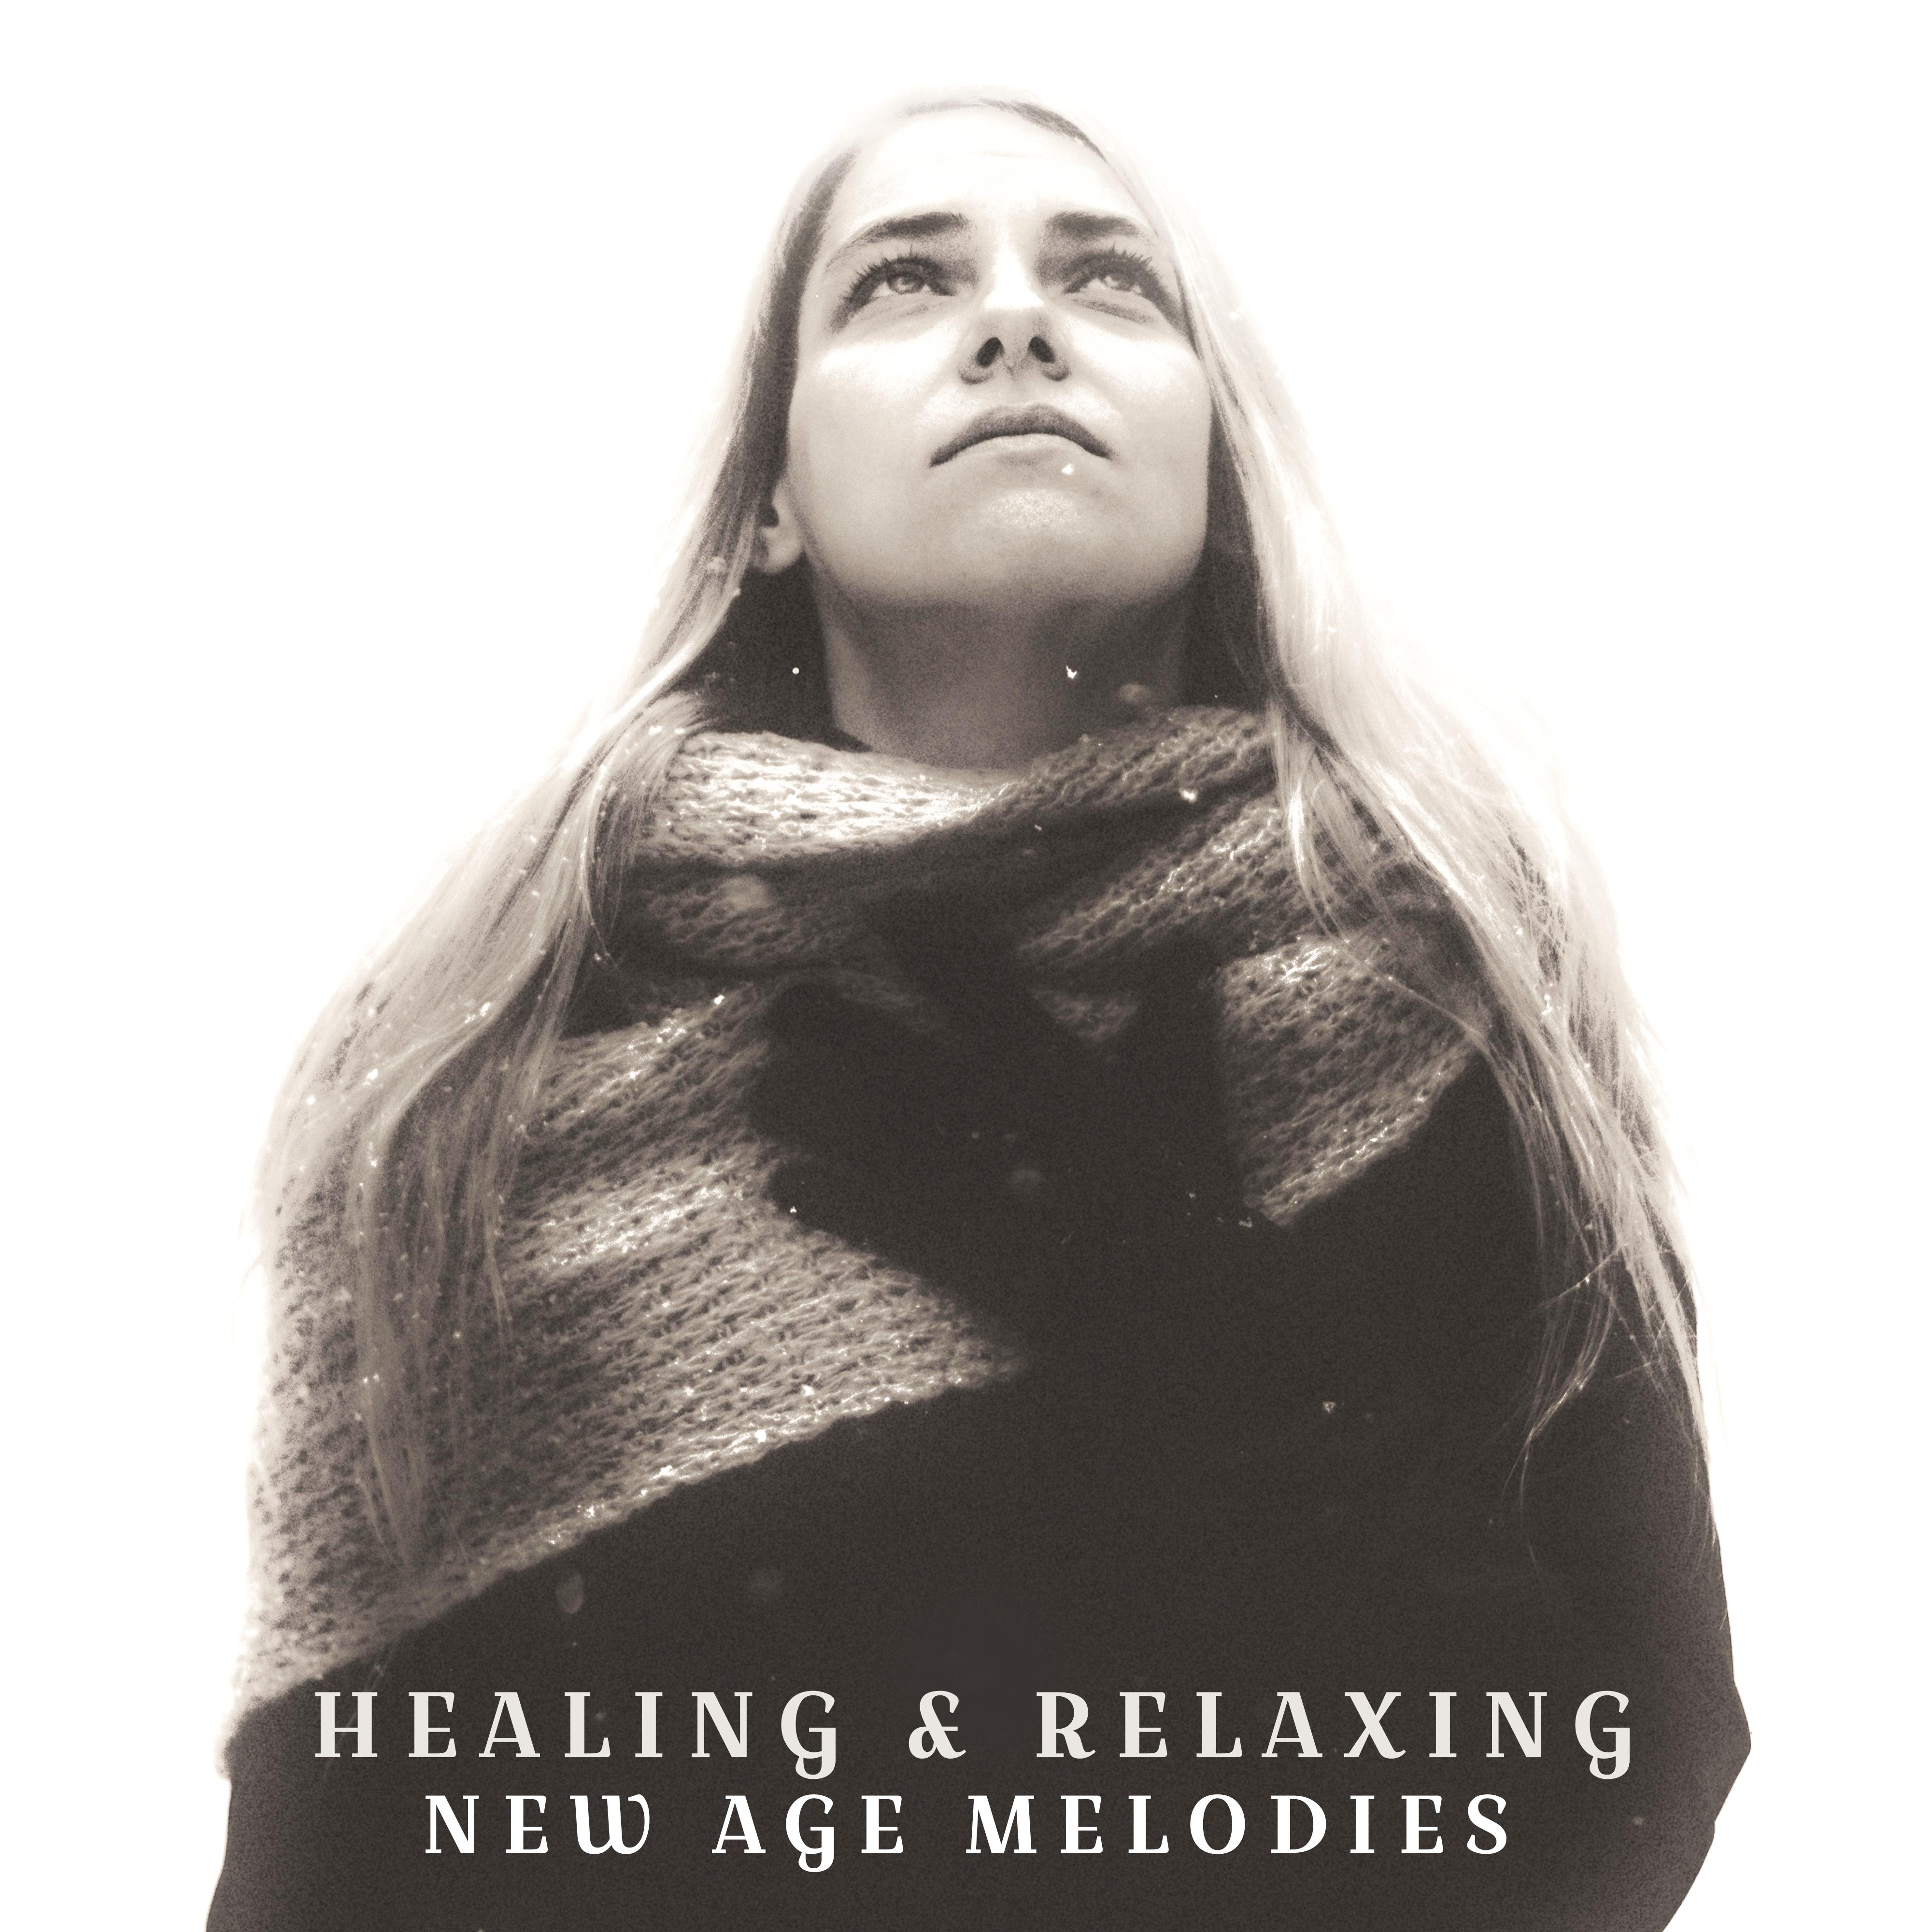 Healing & Relaxing New Age Melodies